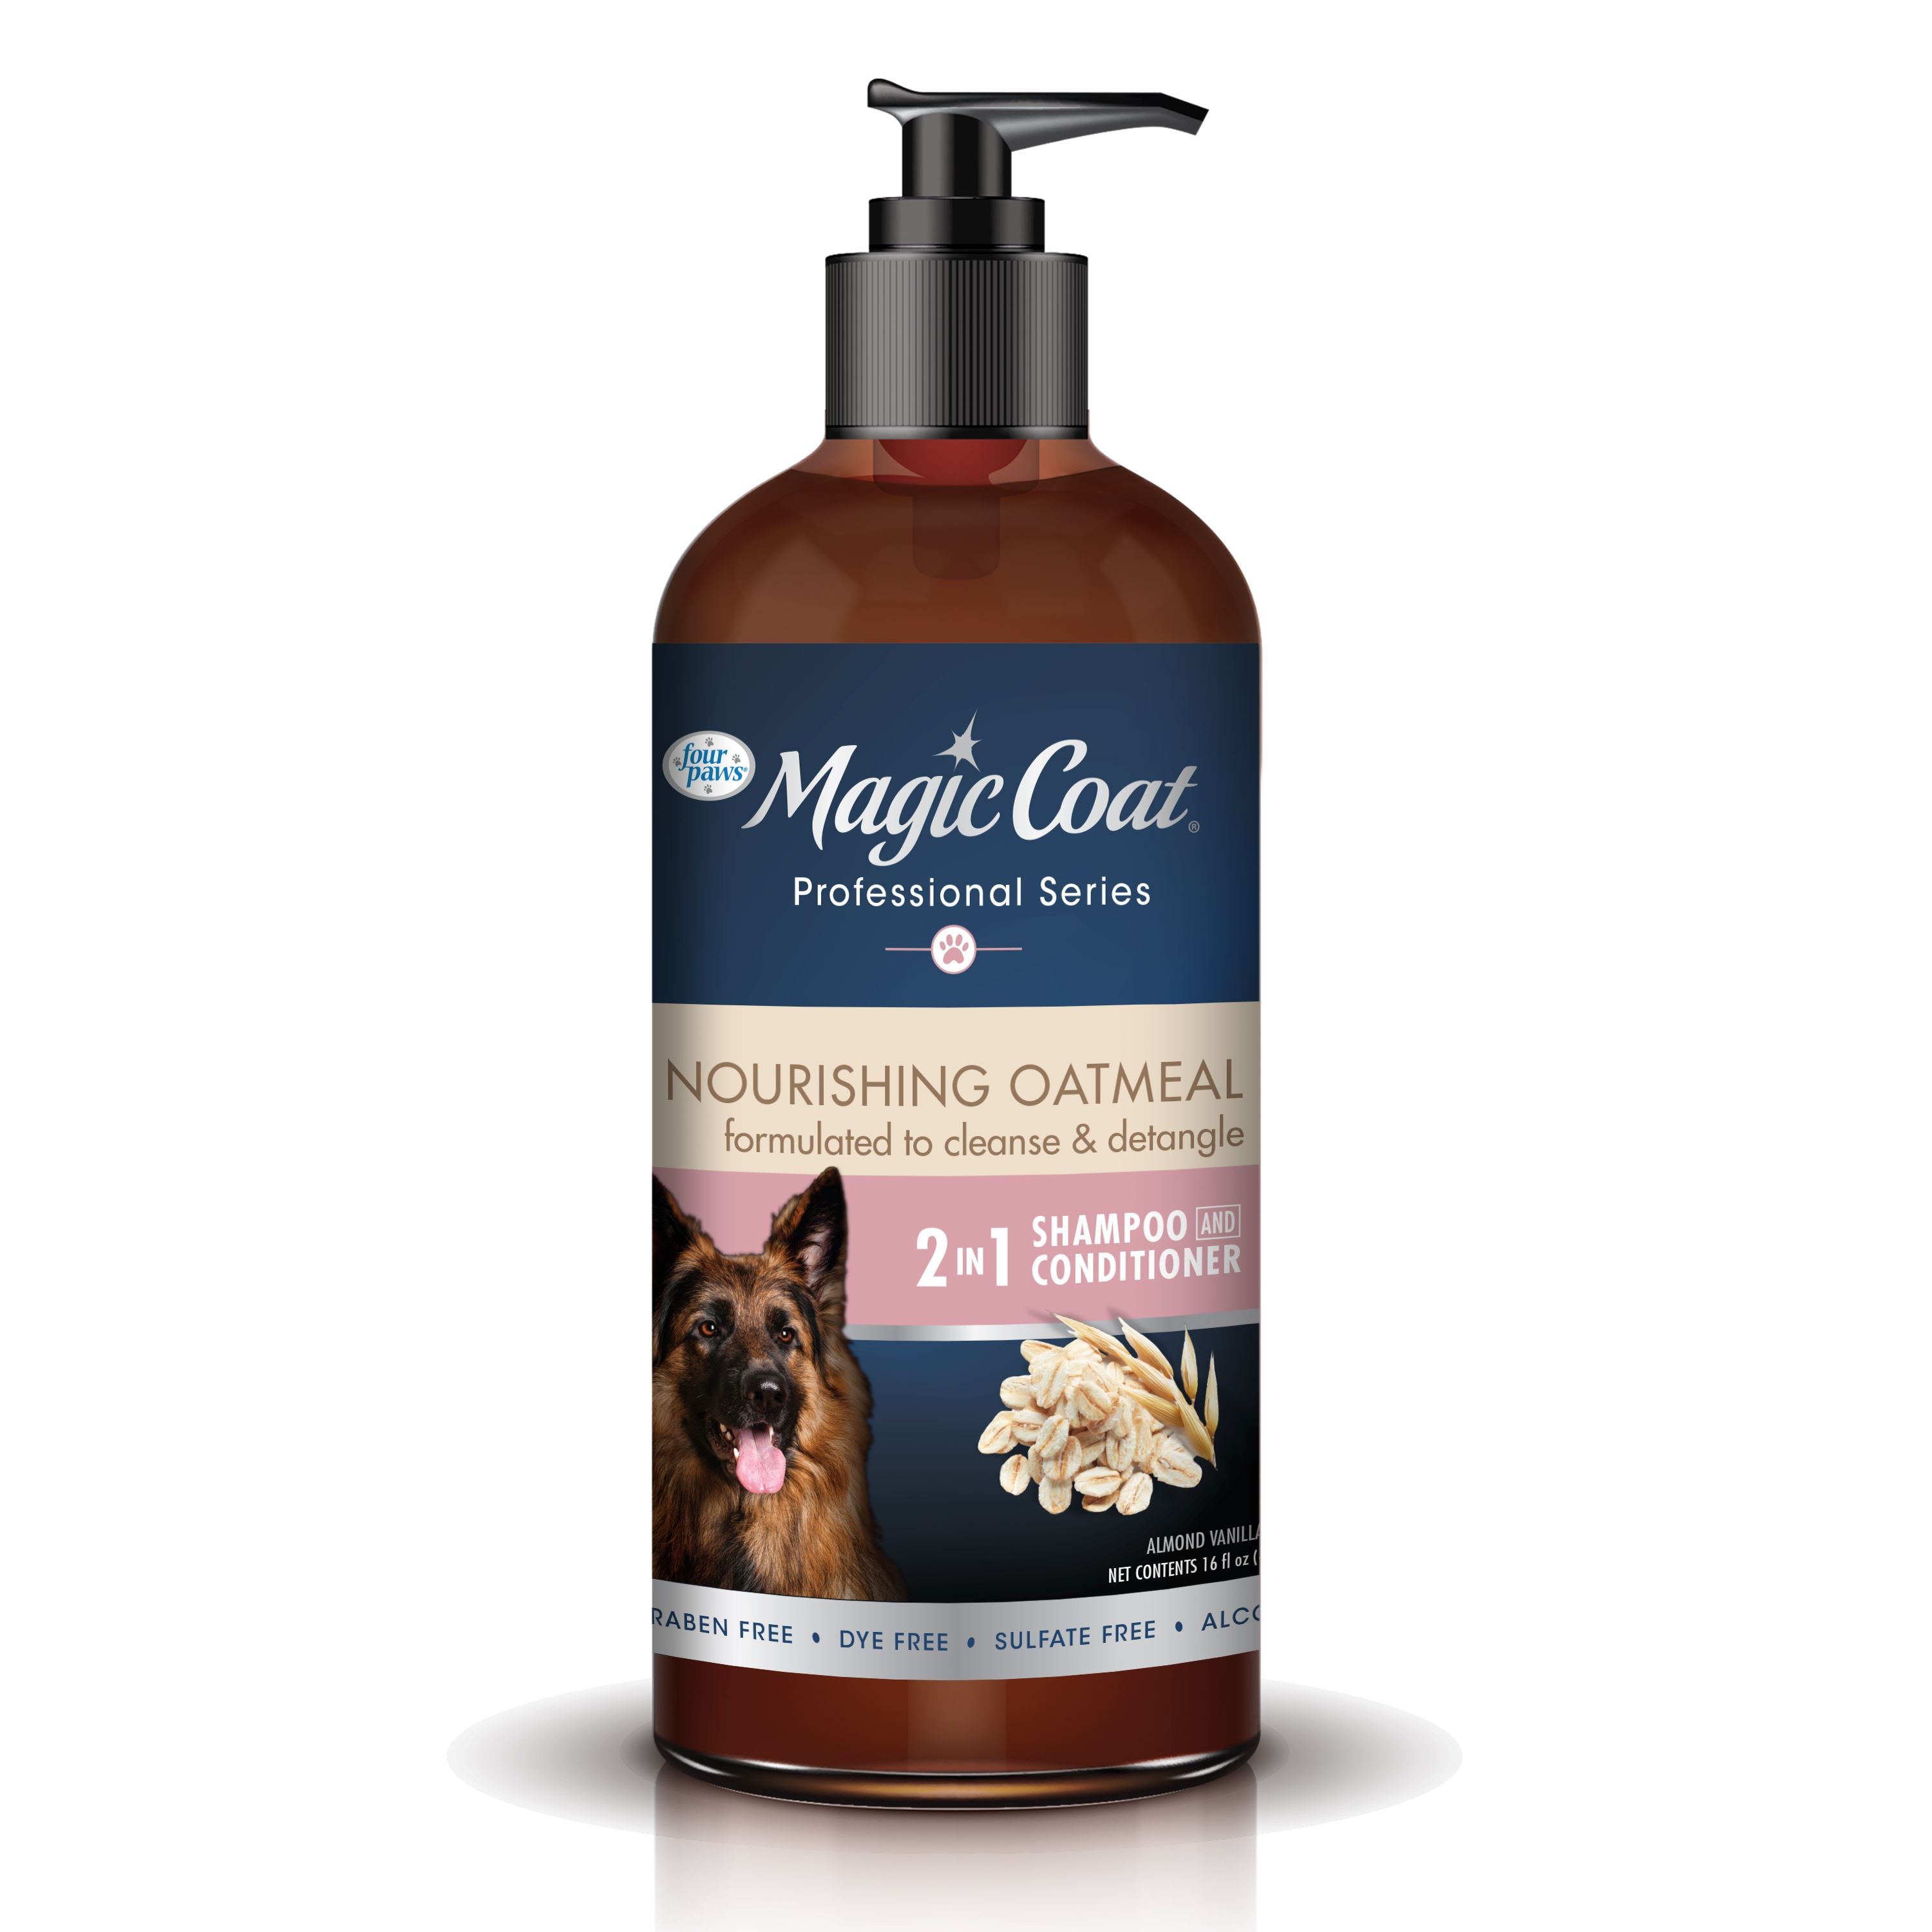 Four Paws Magic Coat Professional Series Nourishing Oatmeal 2 in 1 Dog Shampoo and Conditioner Two in One - 16 Fl. Oz  